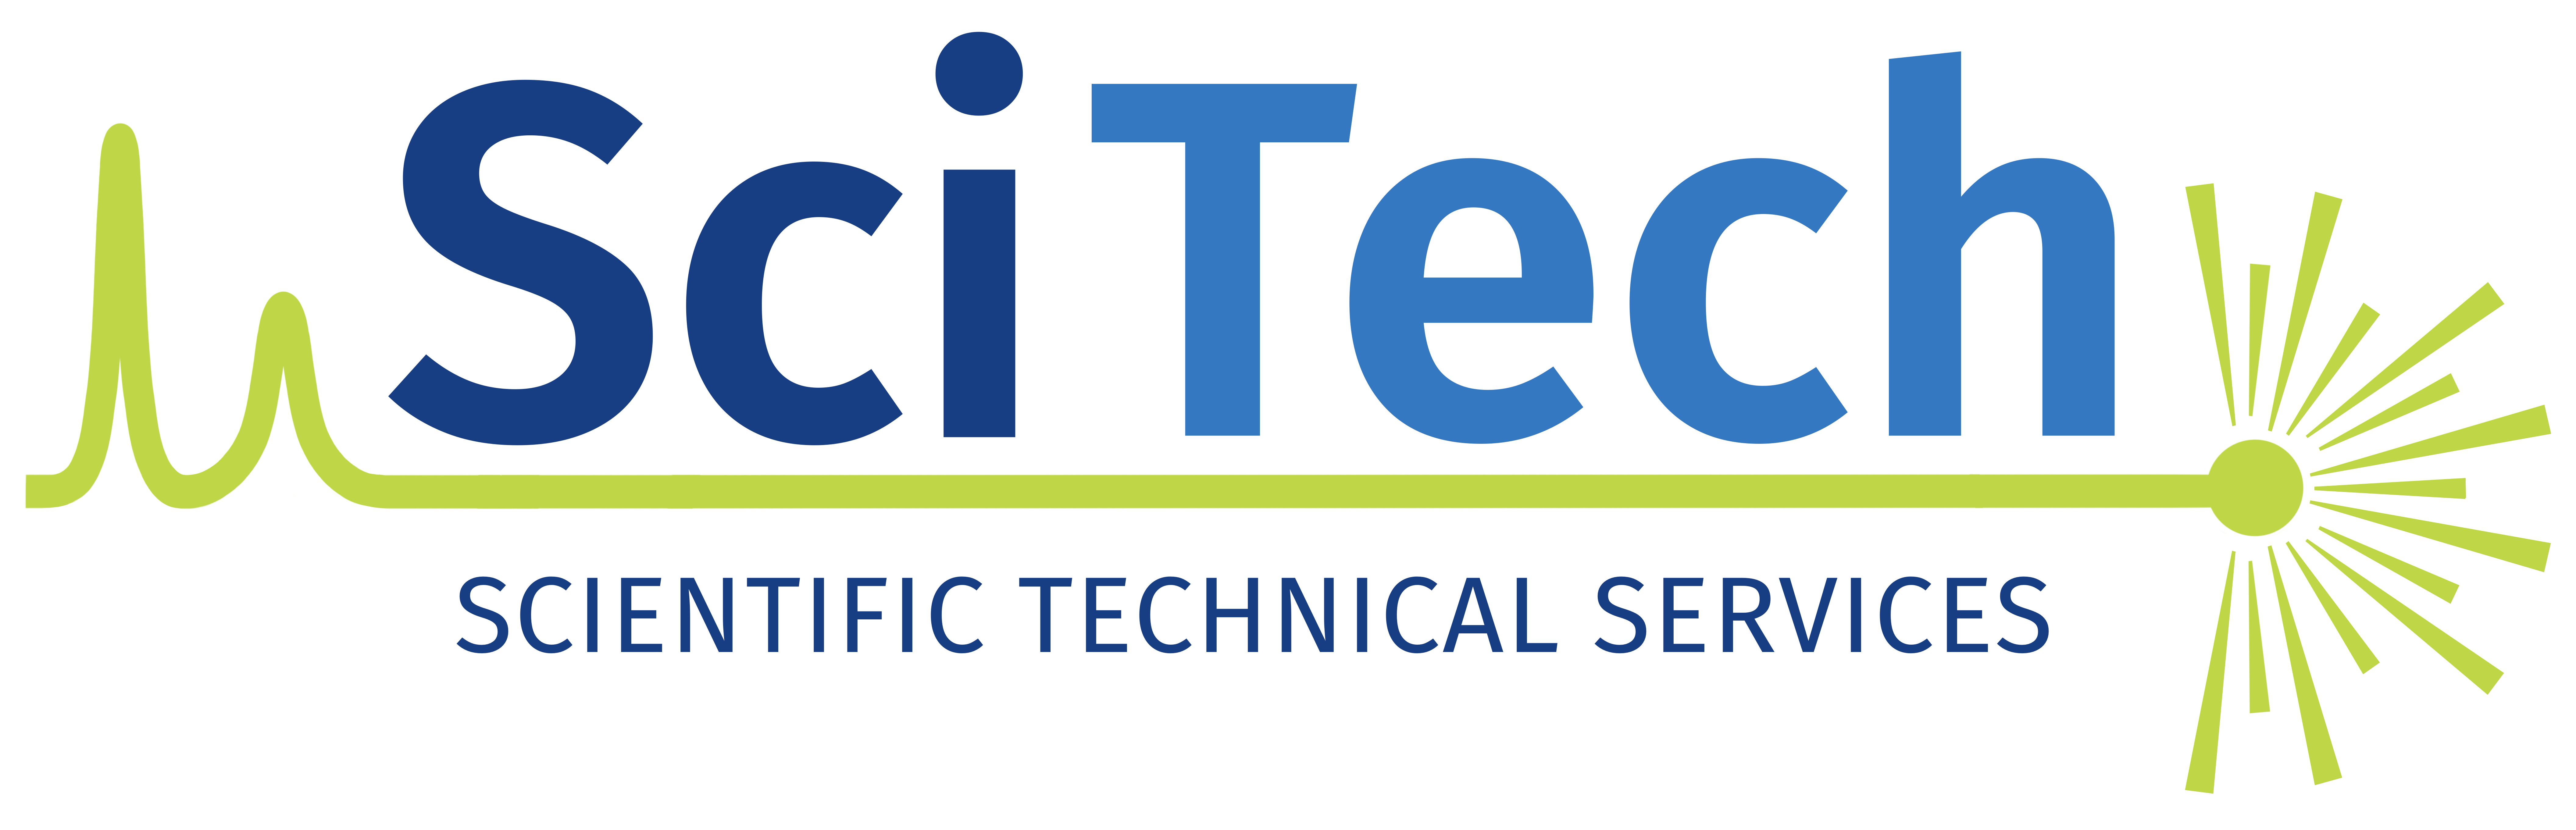 SciTech logo in blues and green